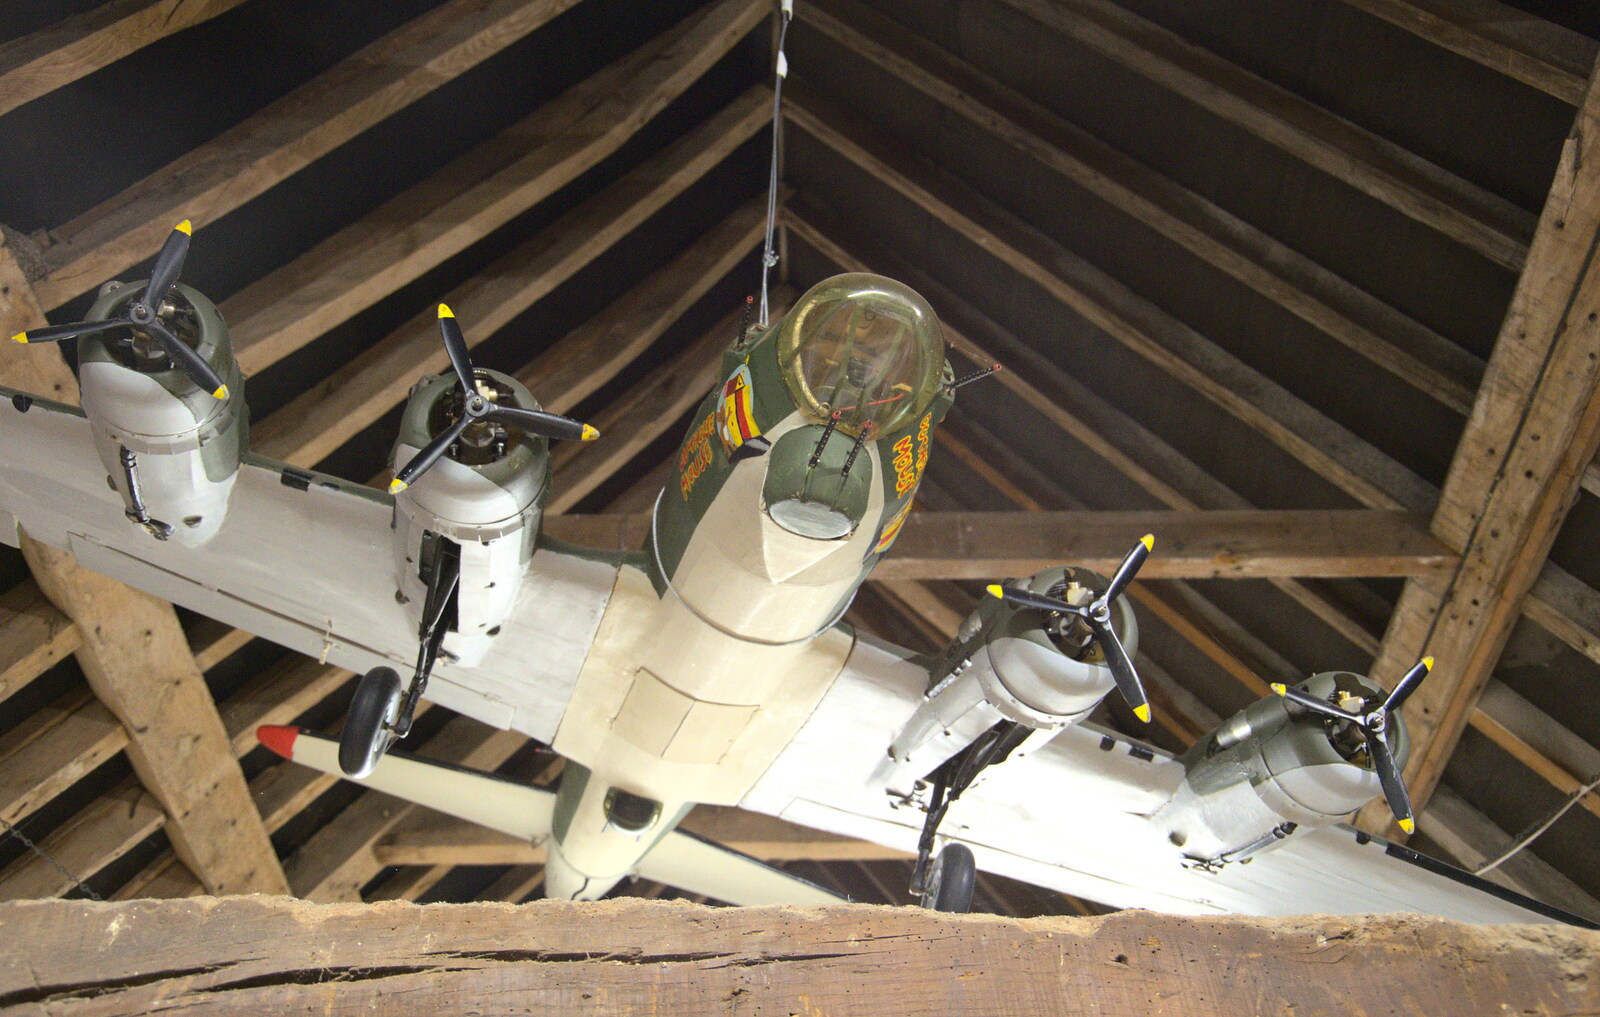 A big model aeroplane hangs from the roof from A Trip to Blickling Hall, Aylsham, Norfolk - 29th April 2018